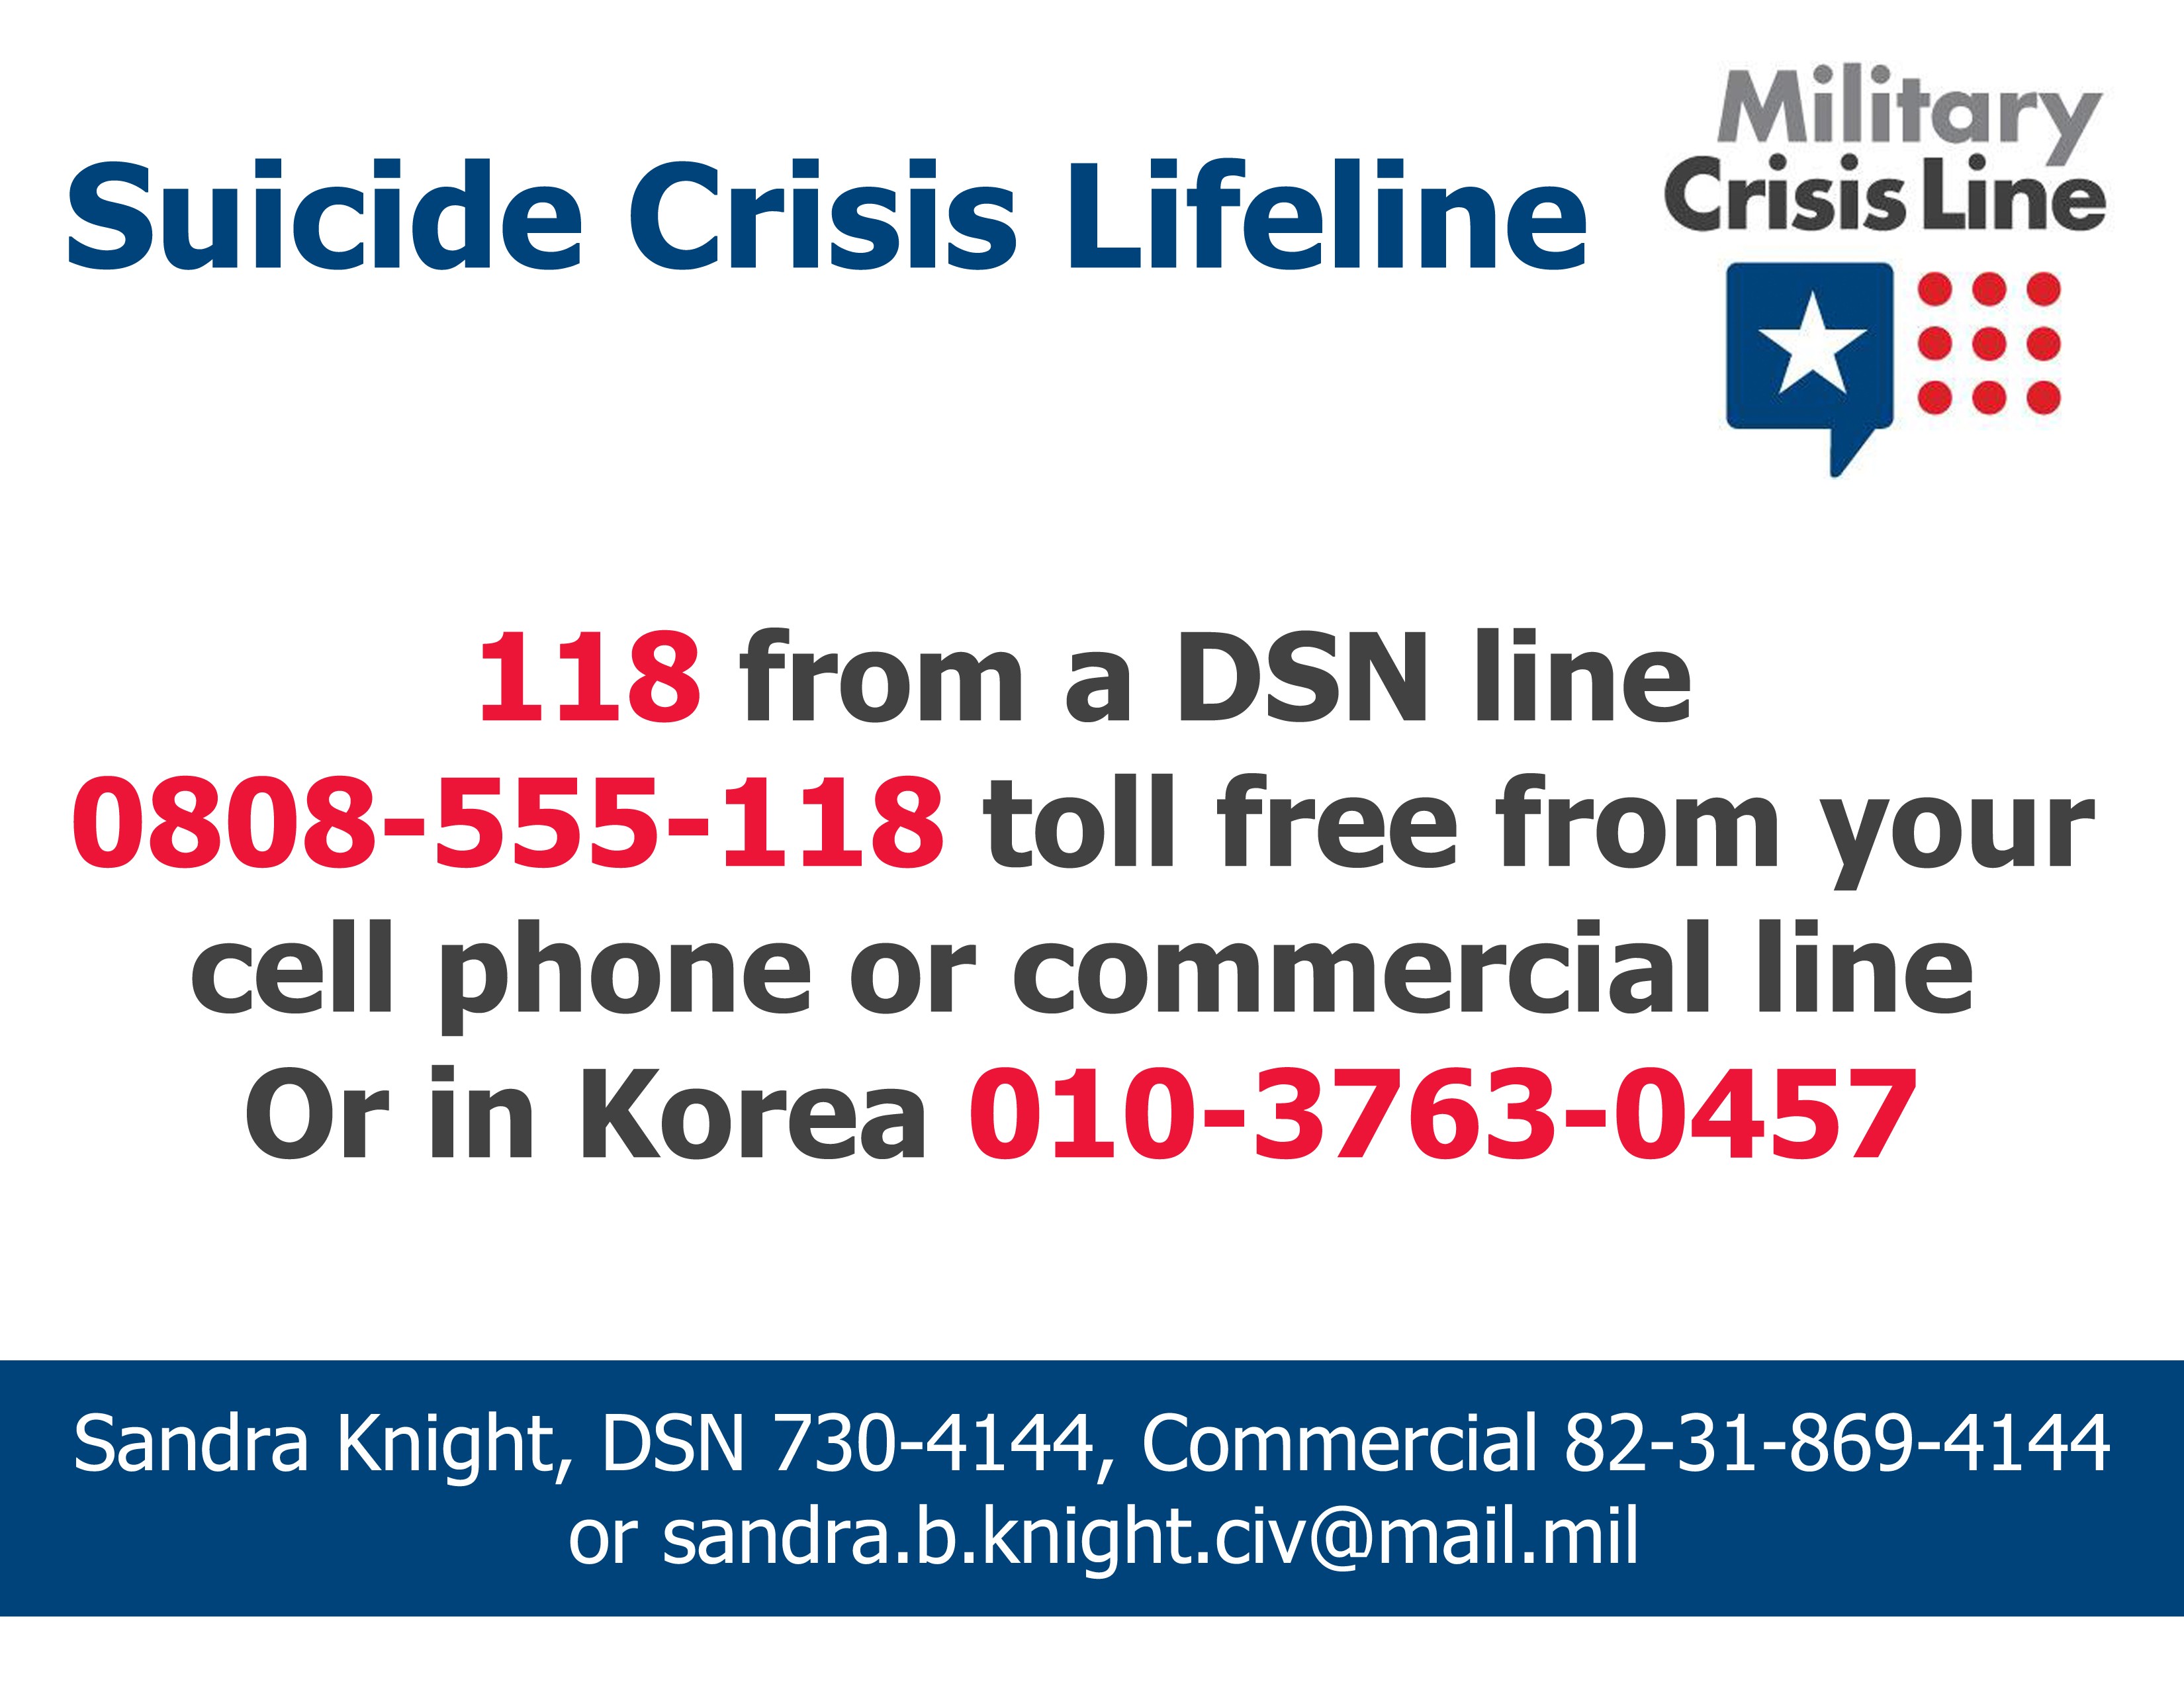 Suicide Crisis Lifeline Article The United States Army